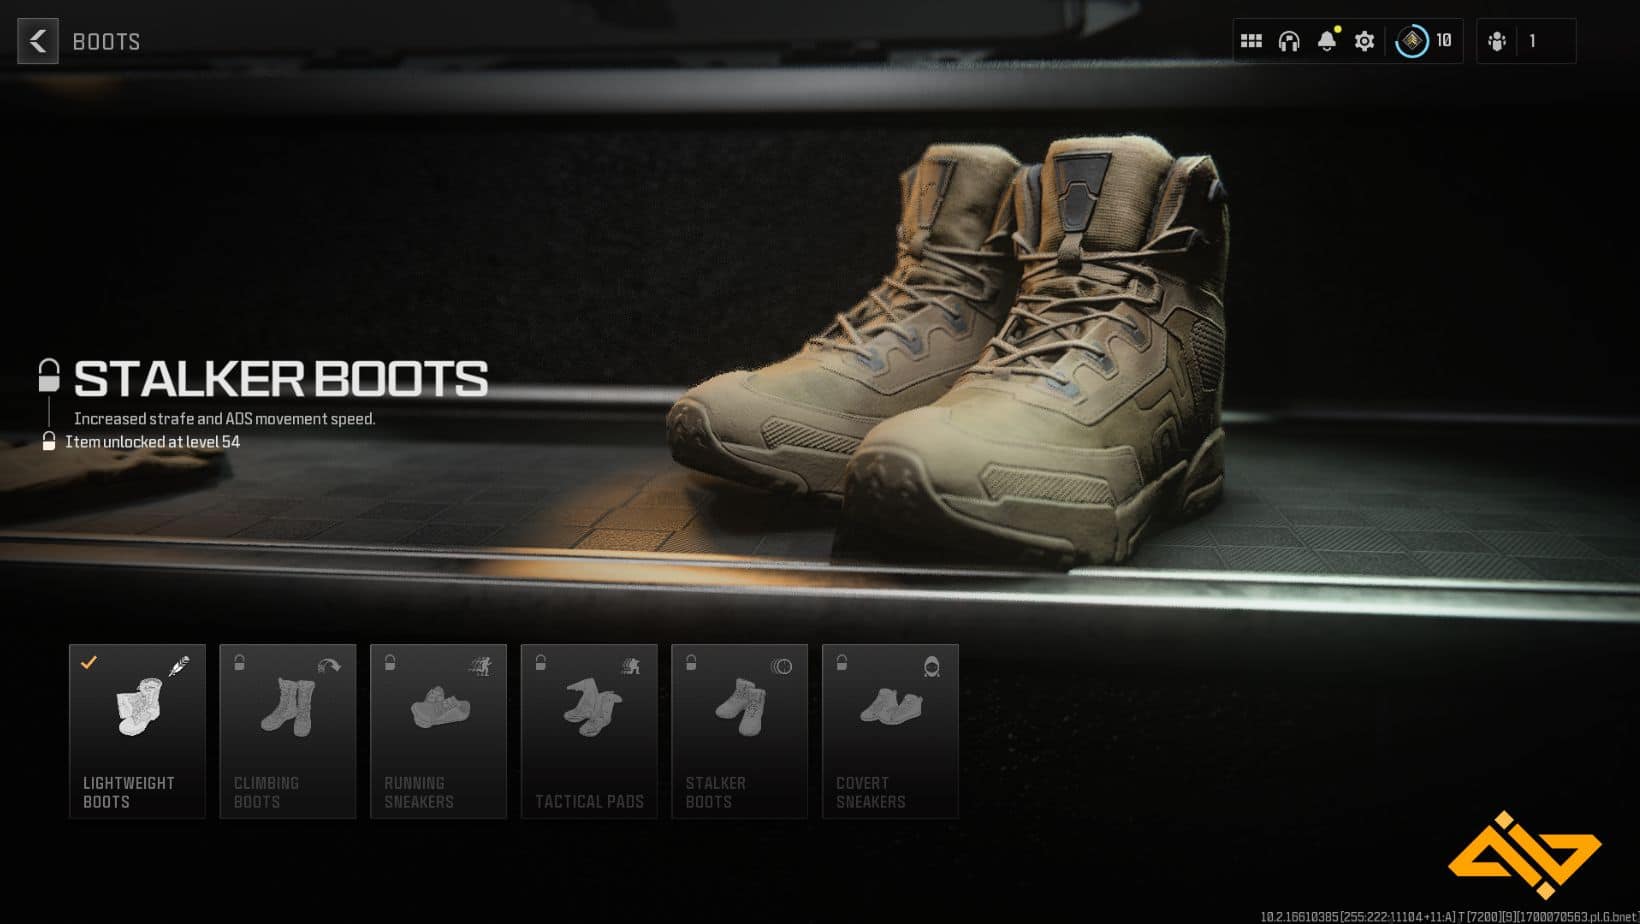 The Stalker Boots allow you to have an increased strafe and ADS movement speed.